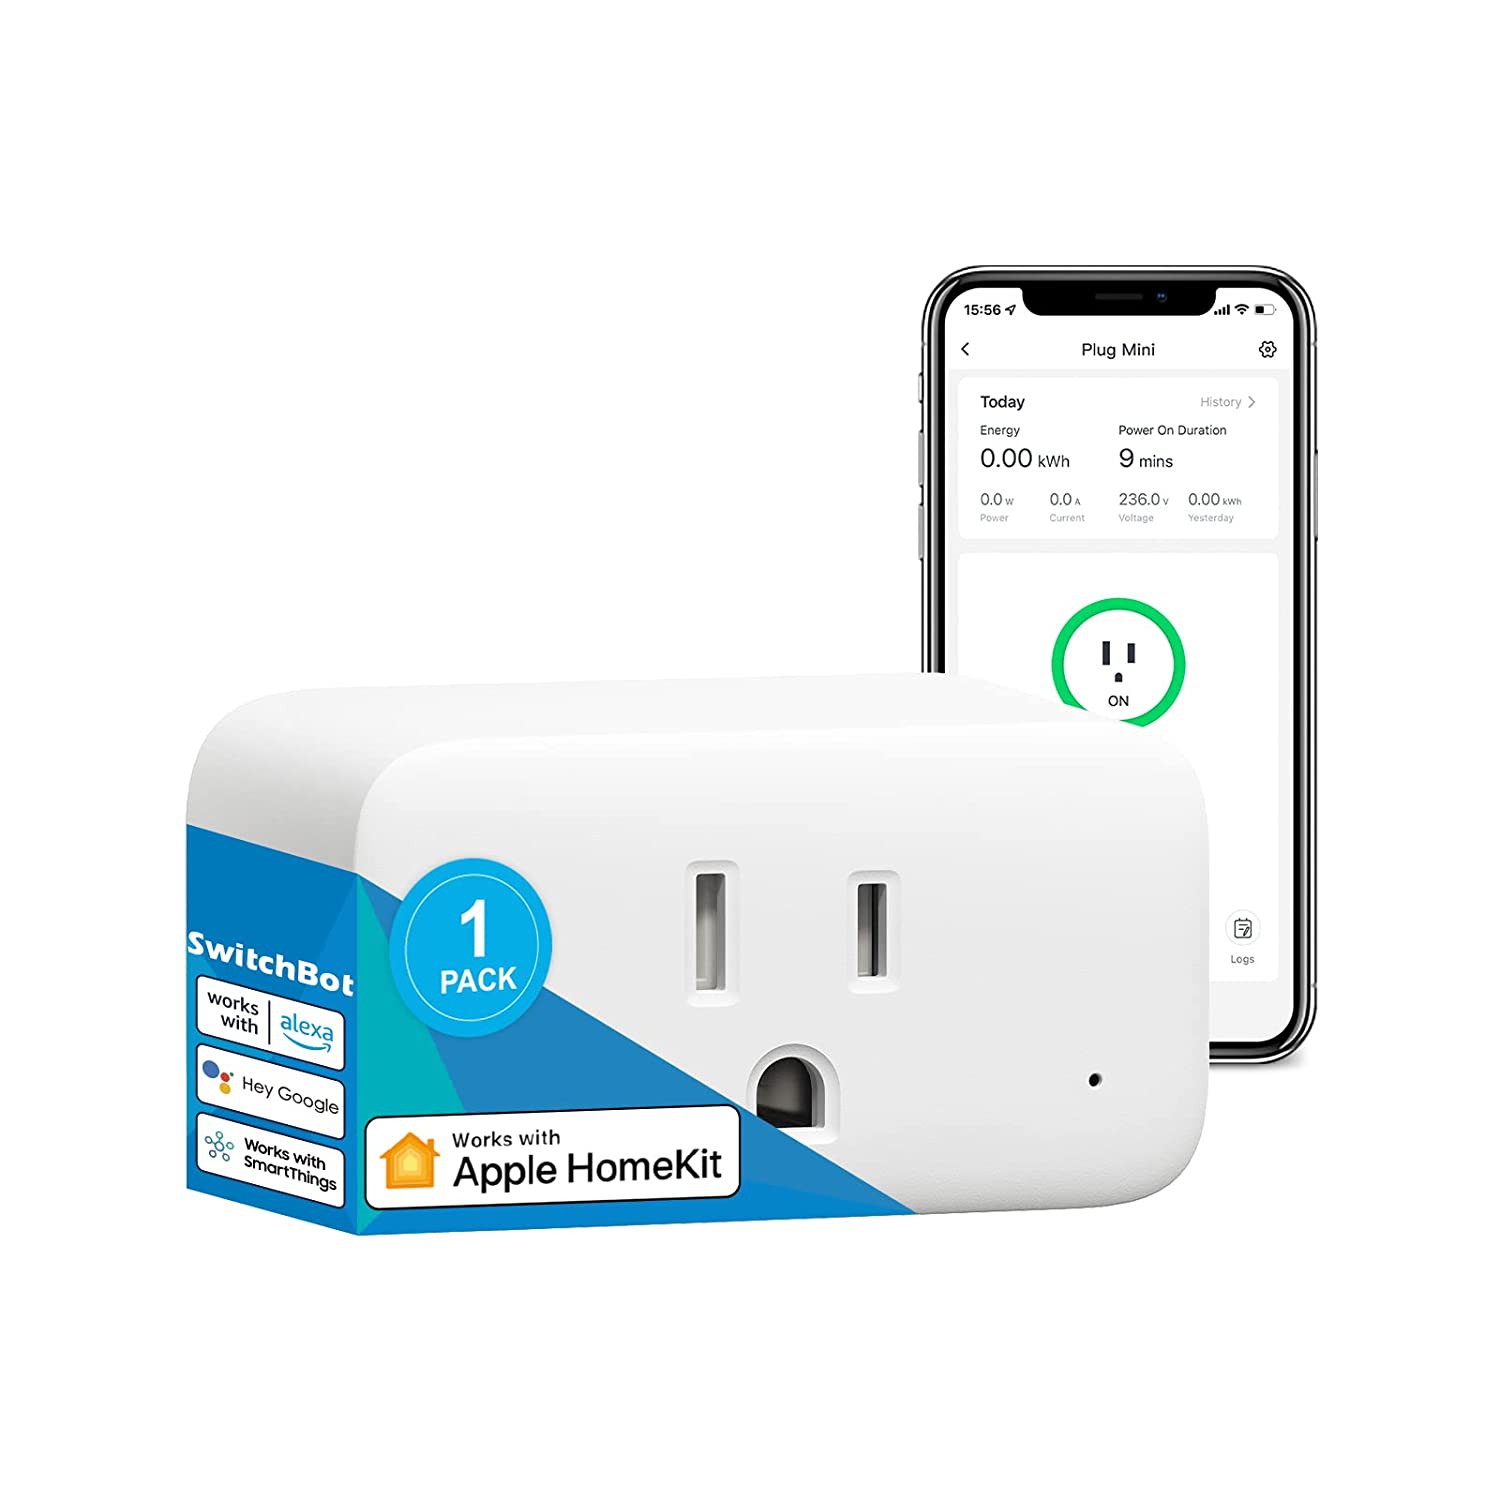 SwitchBot Smart WiFi Plug Mini | Apple HomeKit Enabled, 15A, Bluetooth, Works with Alexa, Google Home, App Remote Control & Timer Function, No Hub Required